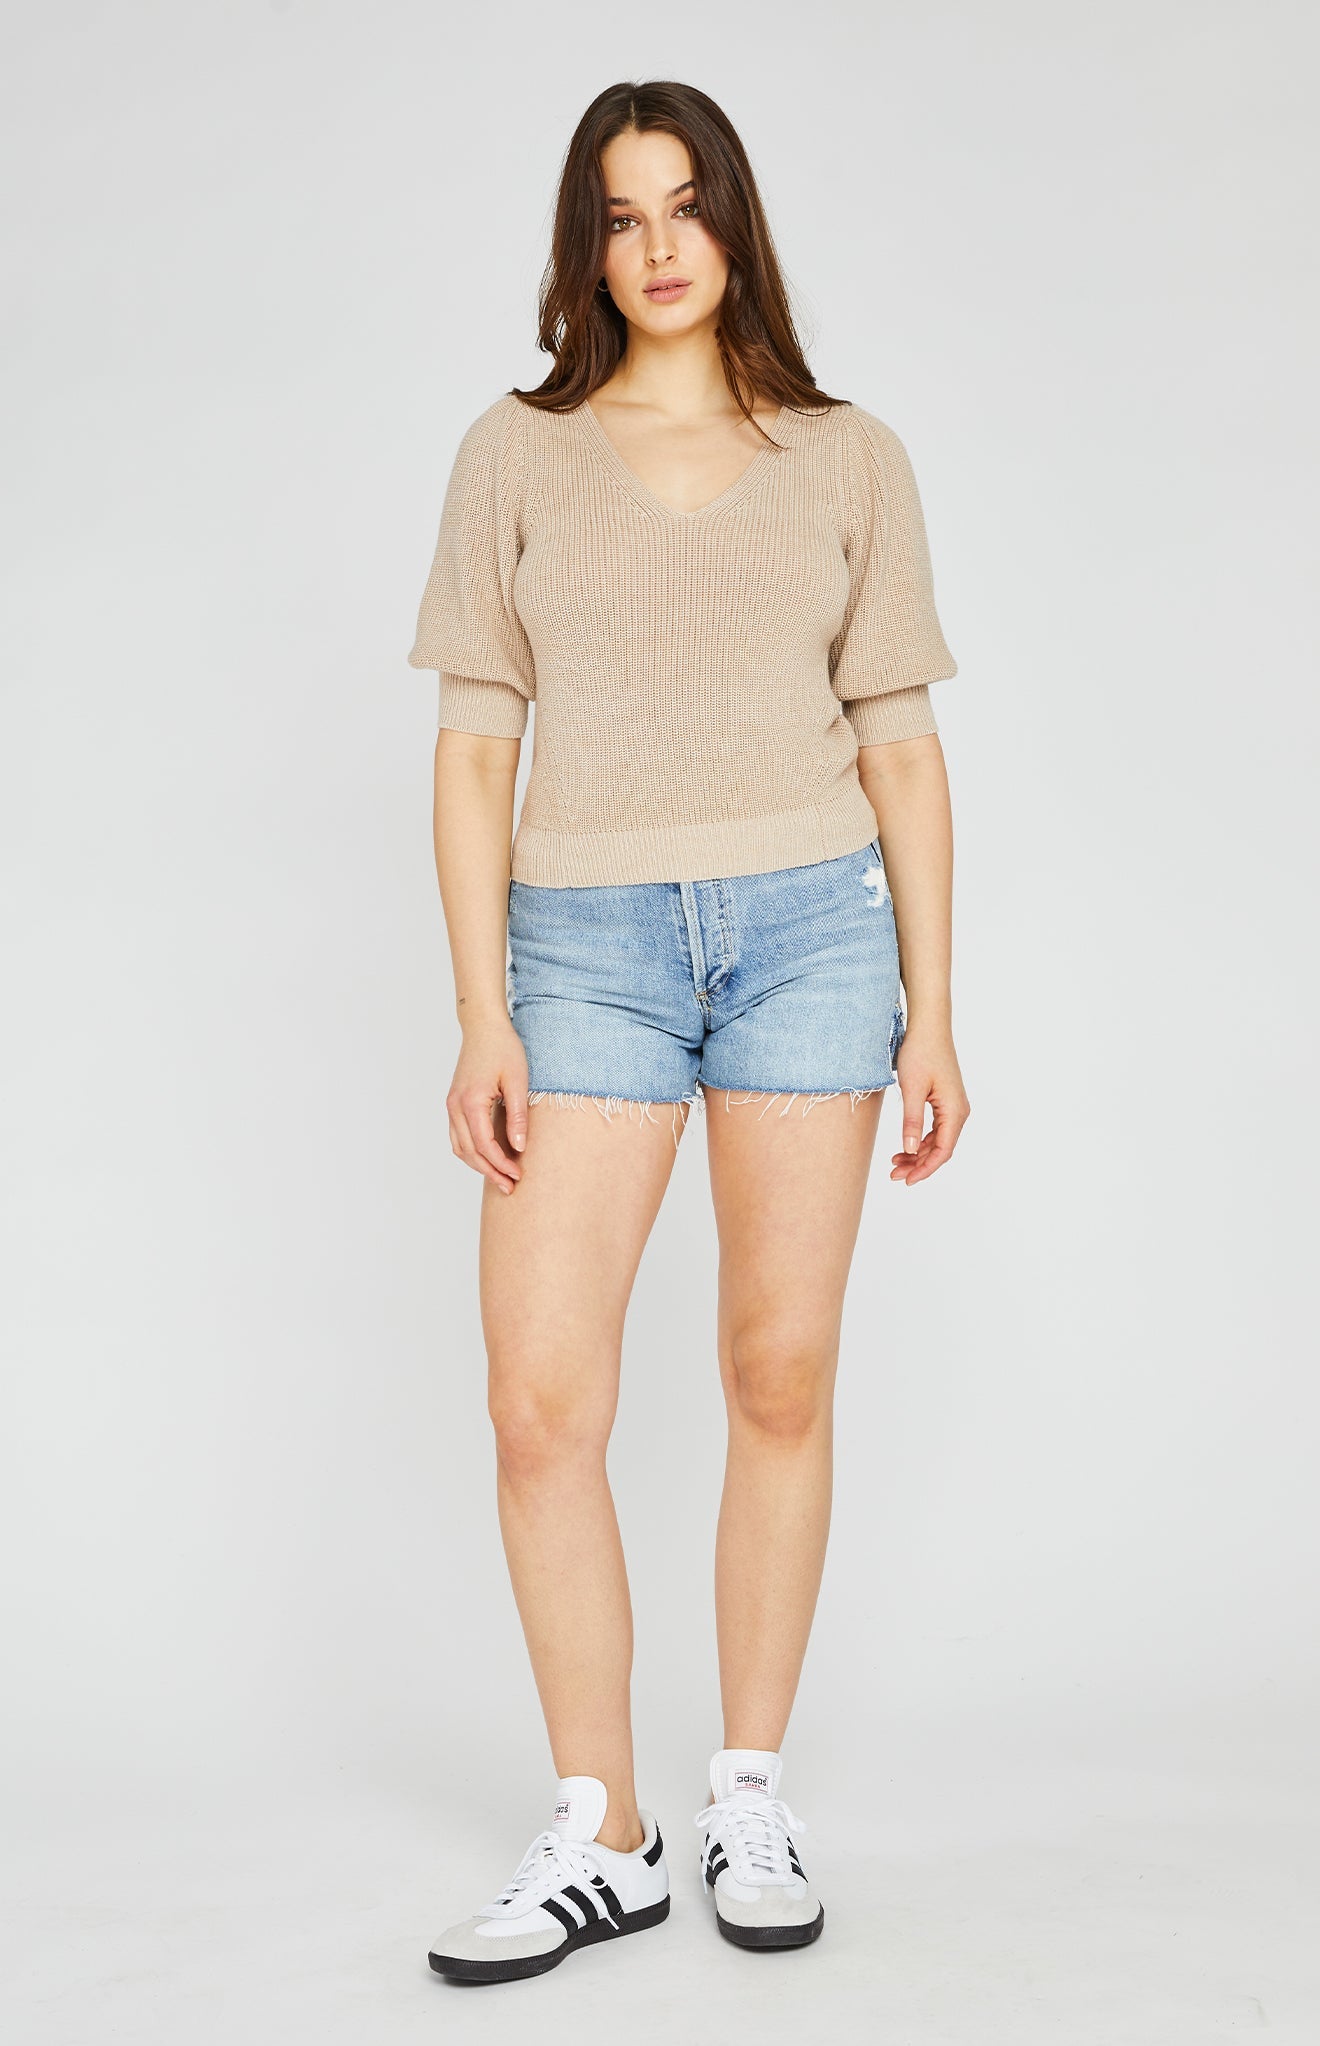 Phoebe Pullover Sweater|color:Oat